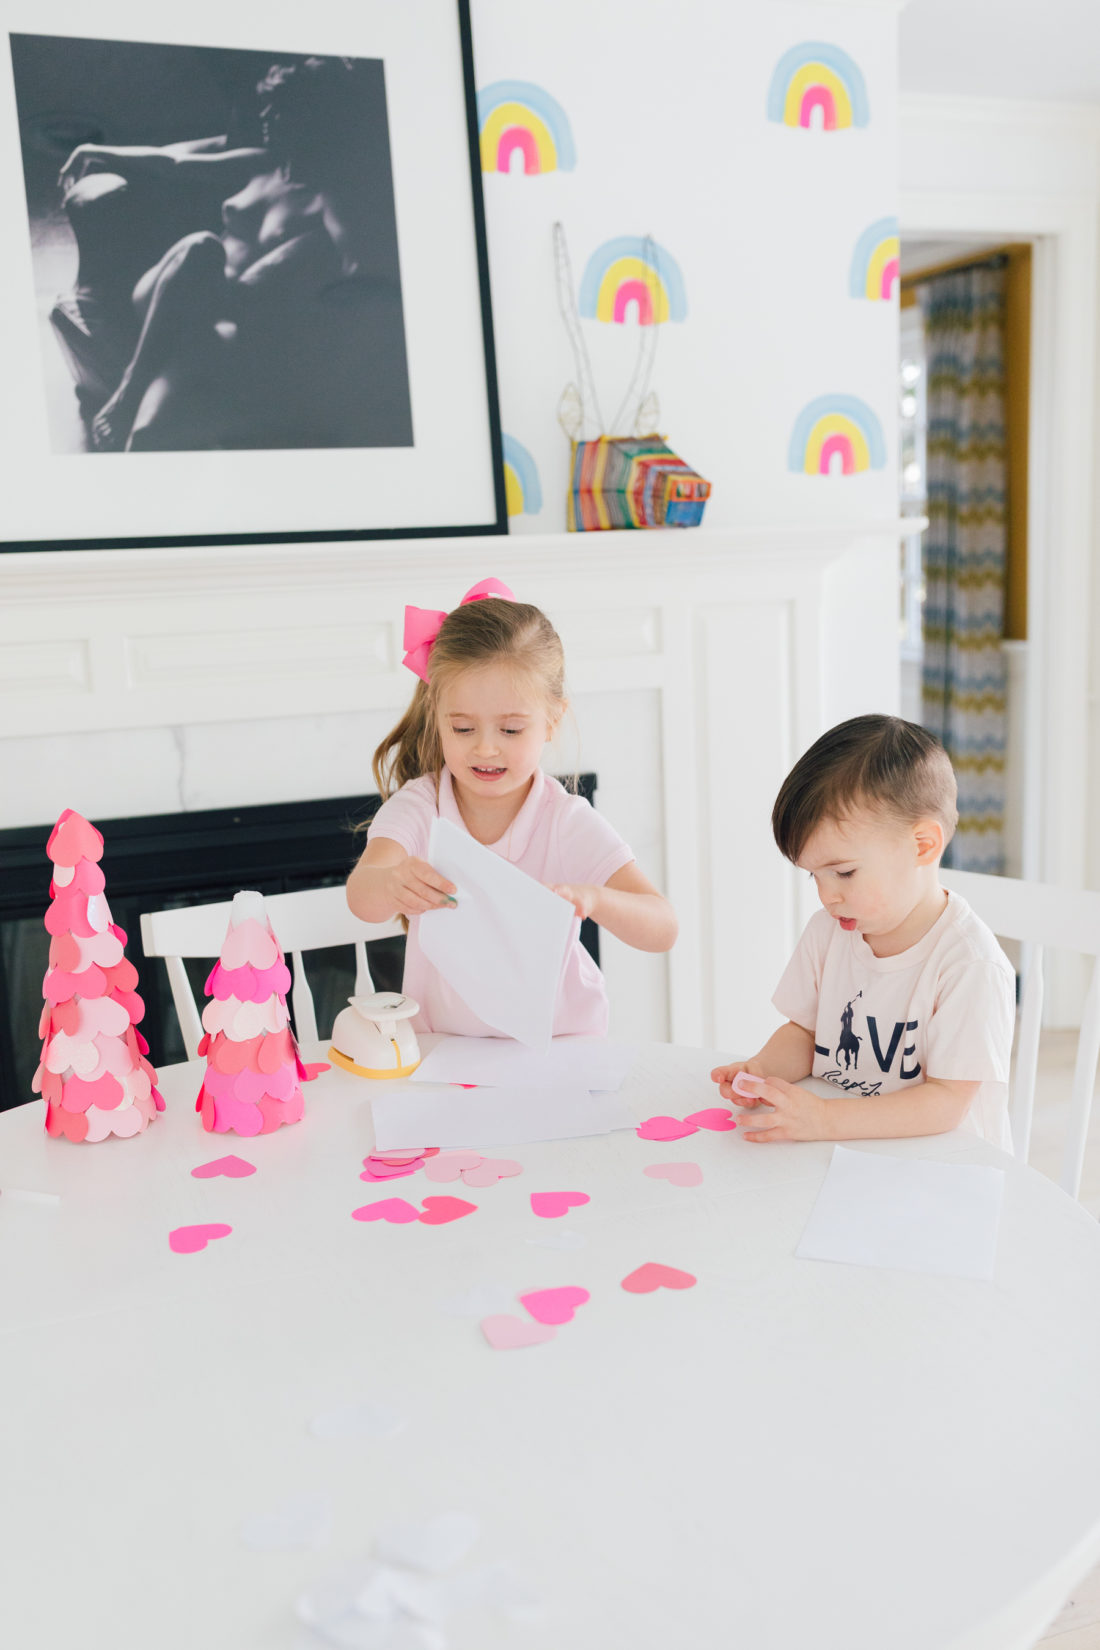 Marlowe and Major martino use a heart hole pumch to create the materials for a valentine's day craft